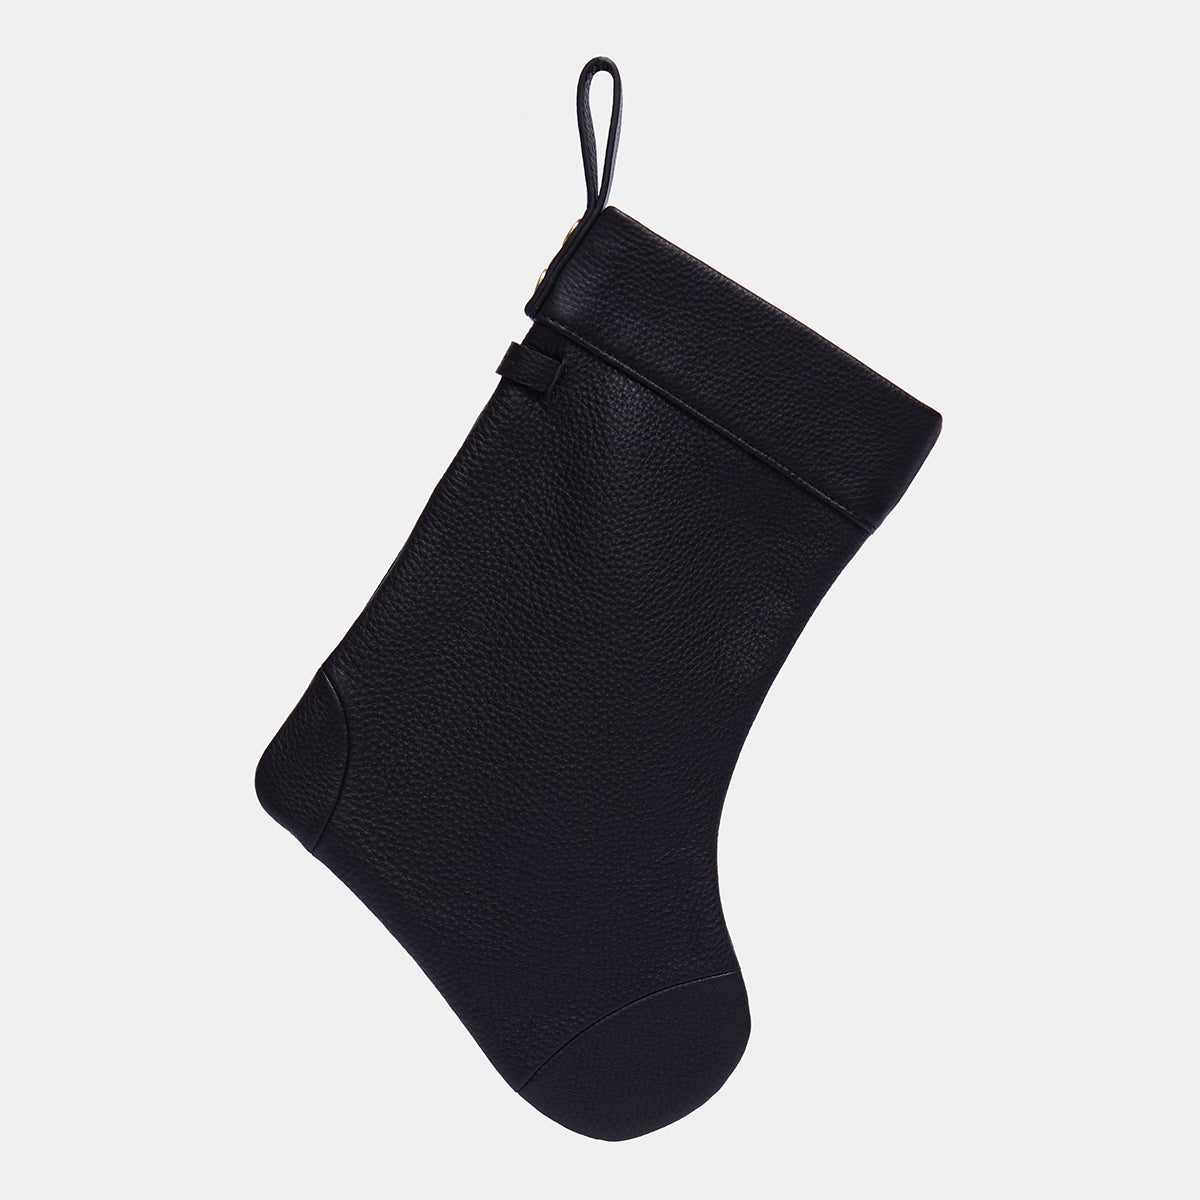 Stocking-Lrg-Black-Front-View